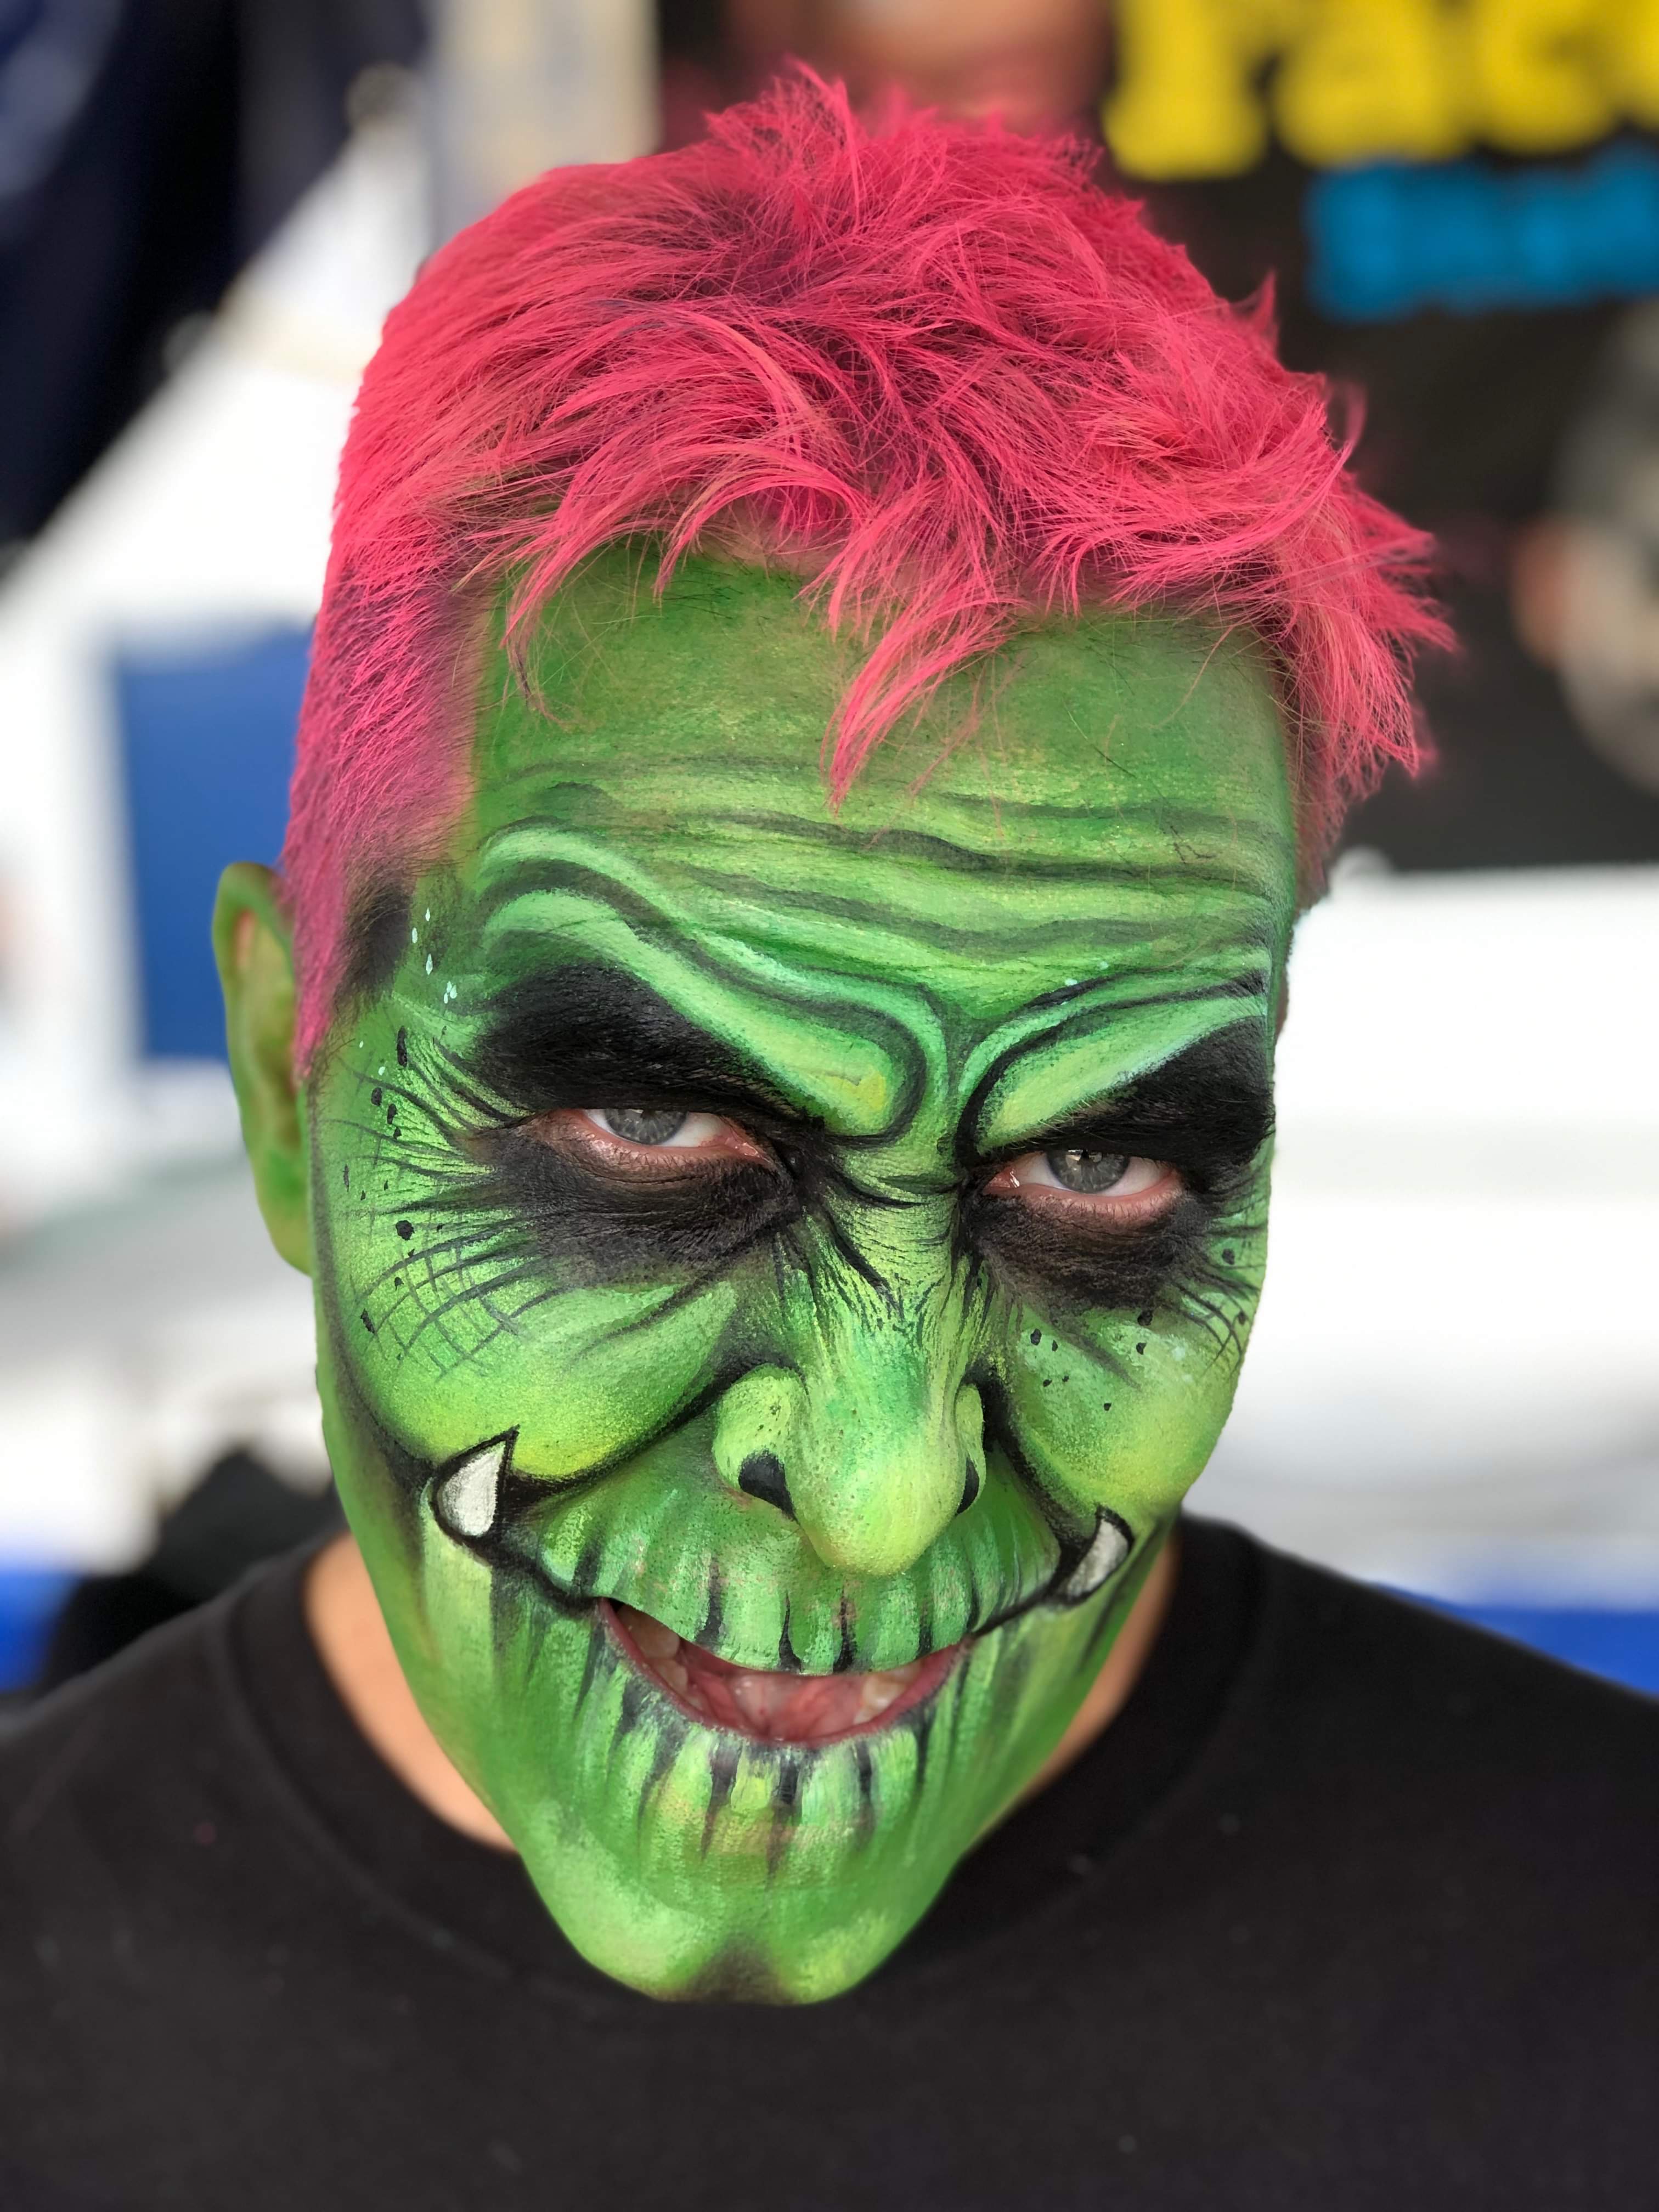 Man with a face painting that is green and looks like a monster